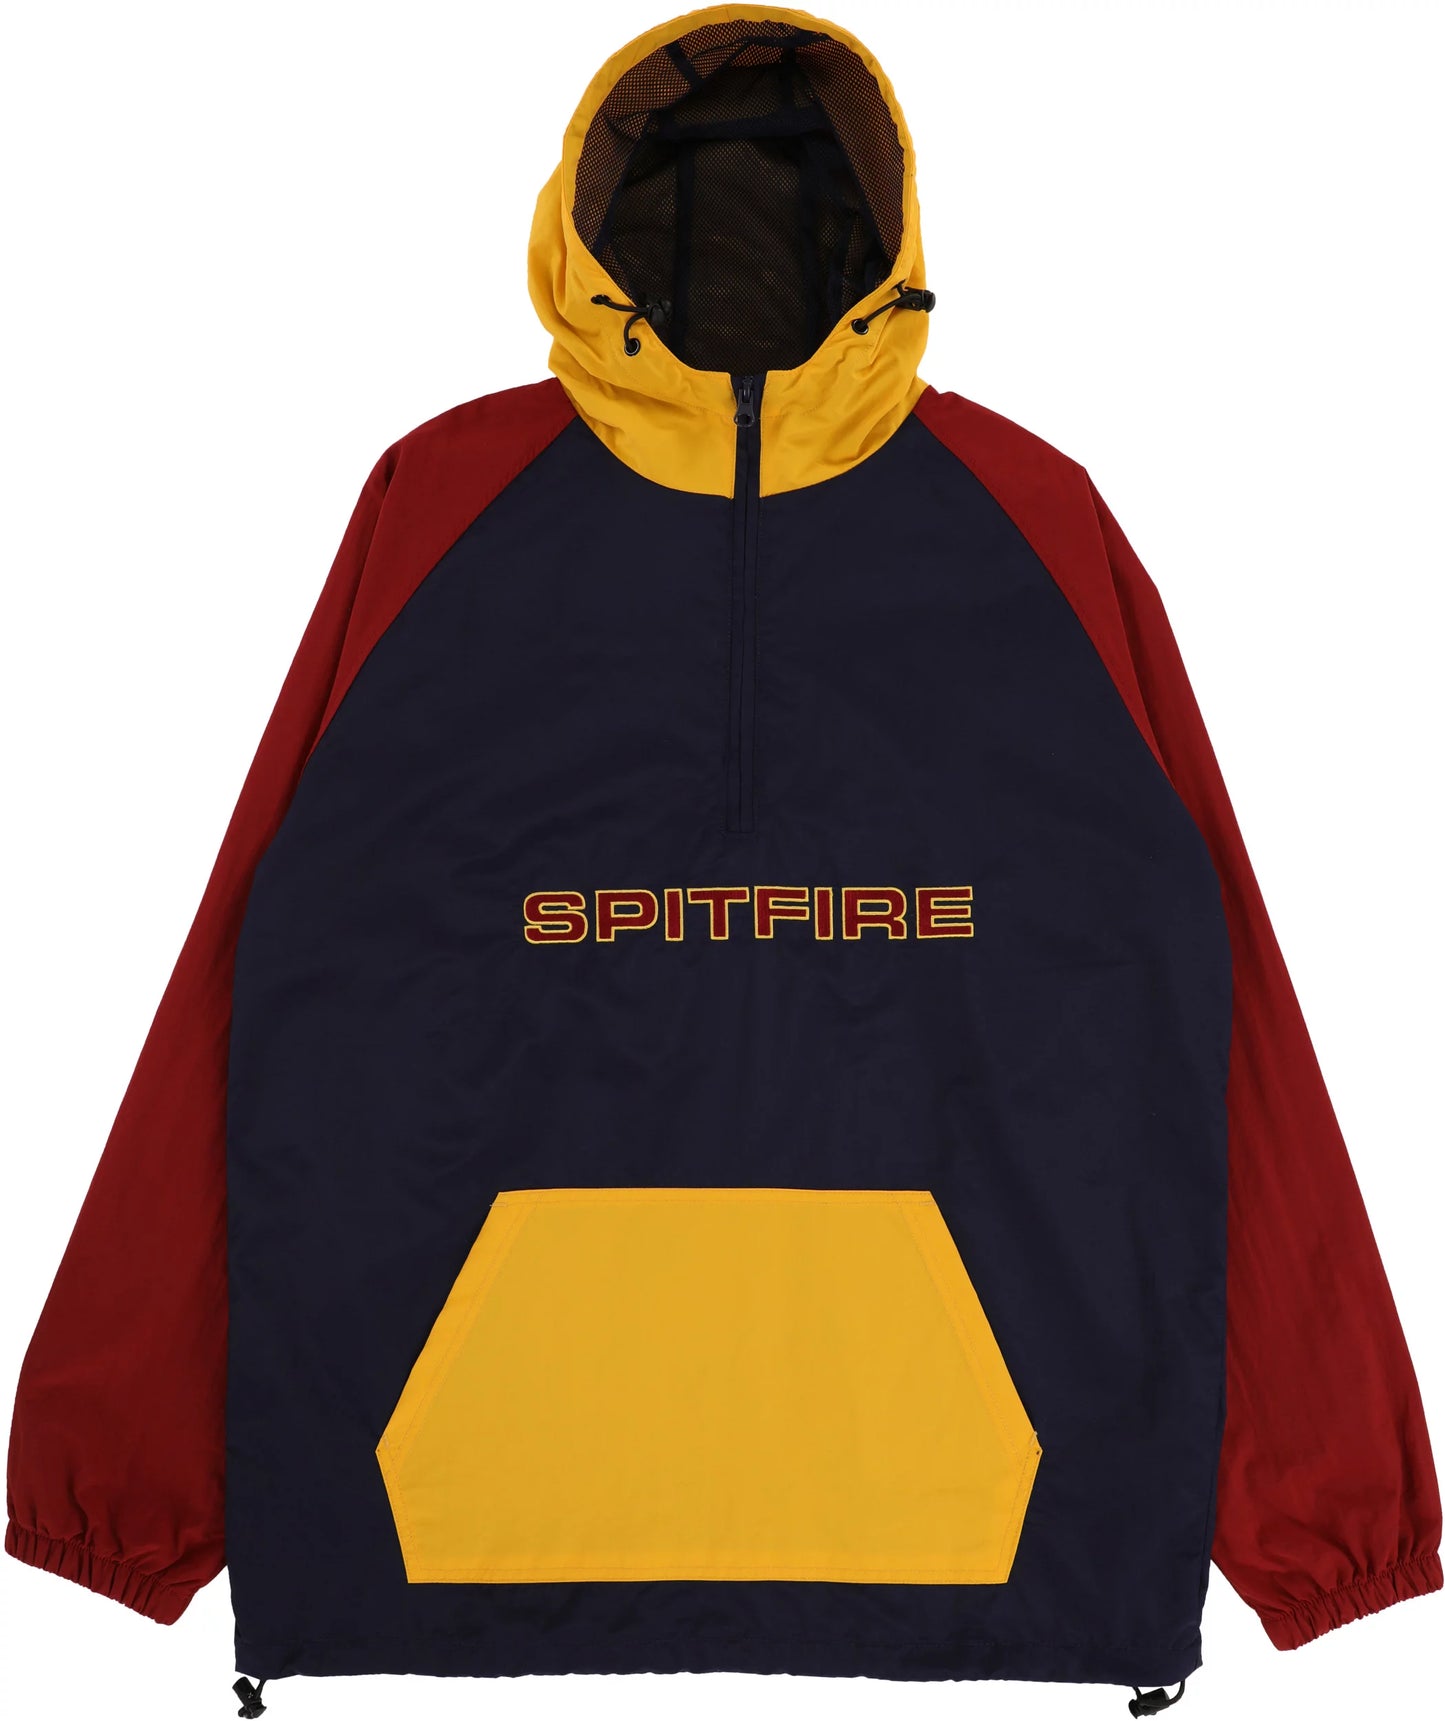 SPITFIRE - CLASSIC 87' CUSTOM JACKET - NAVY/GOLD/RED